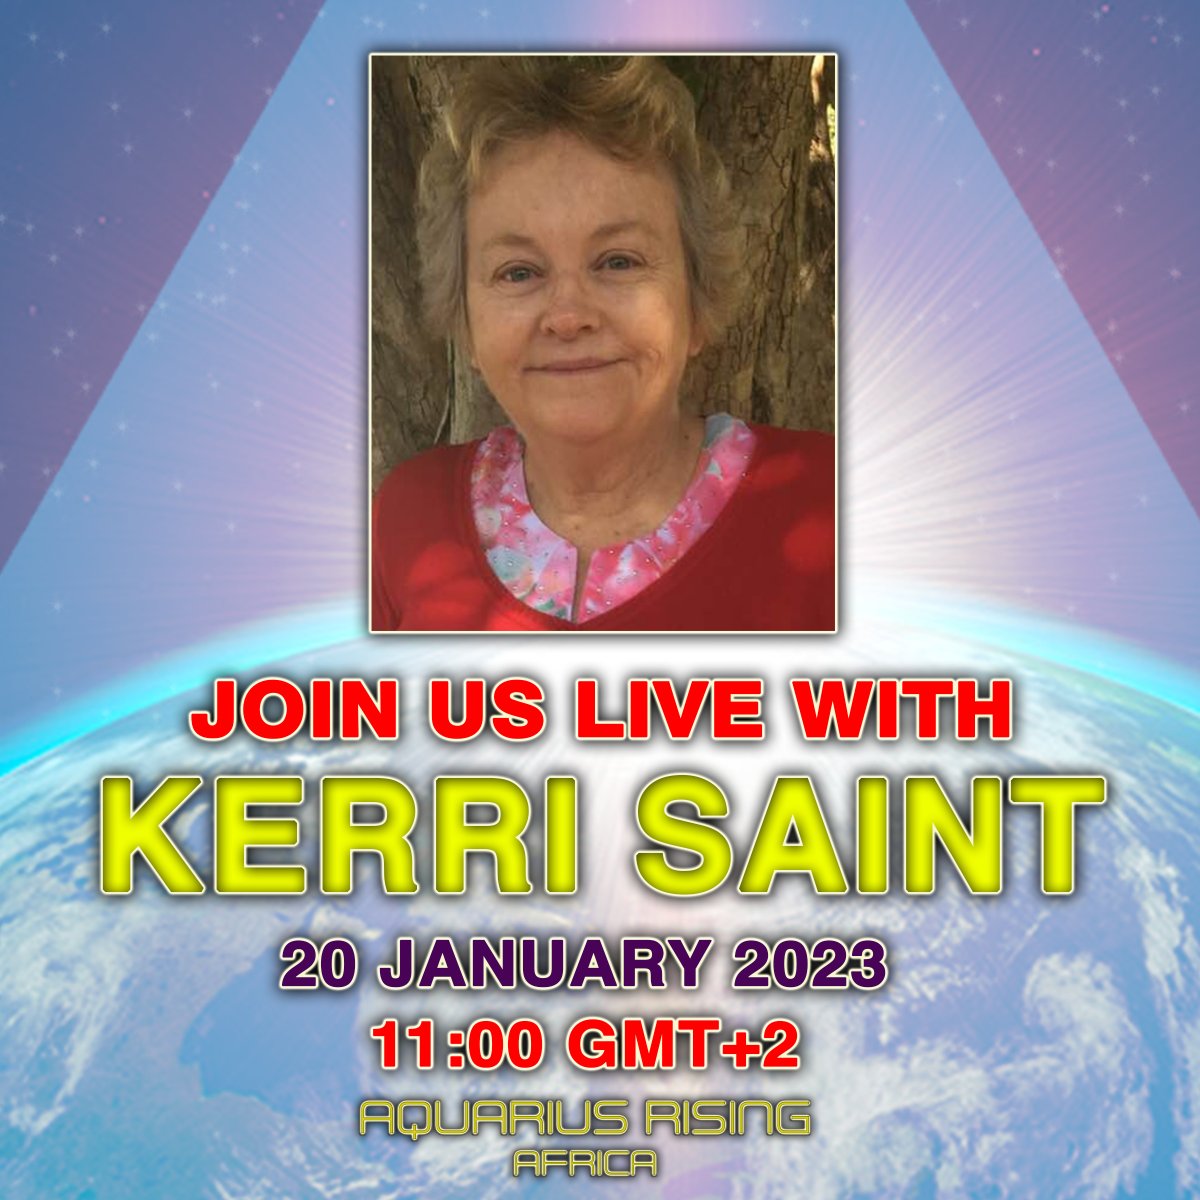 Join me on Focus on Australia for another enlightening connection with Kerri Saint, advocate for forced adoptees in Australia. We further our discussions on Hugh Grant and his wife's involvement in Orphan Angels and AdoptChange in Australia. Tune in.

youtu.be/Ouoa0j82O8o